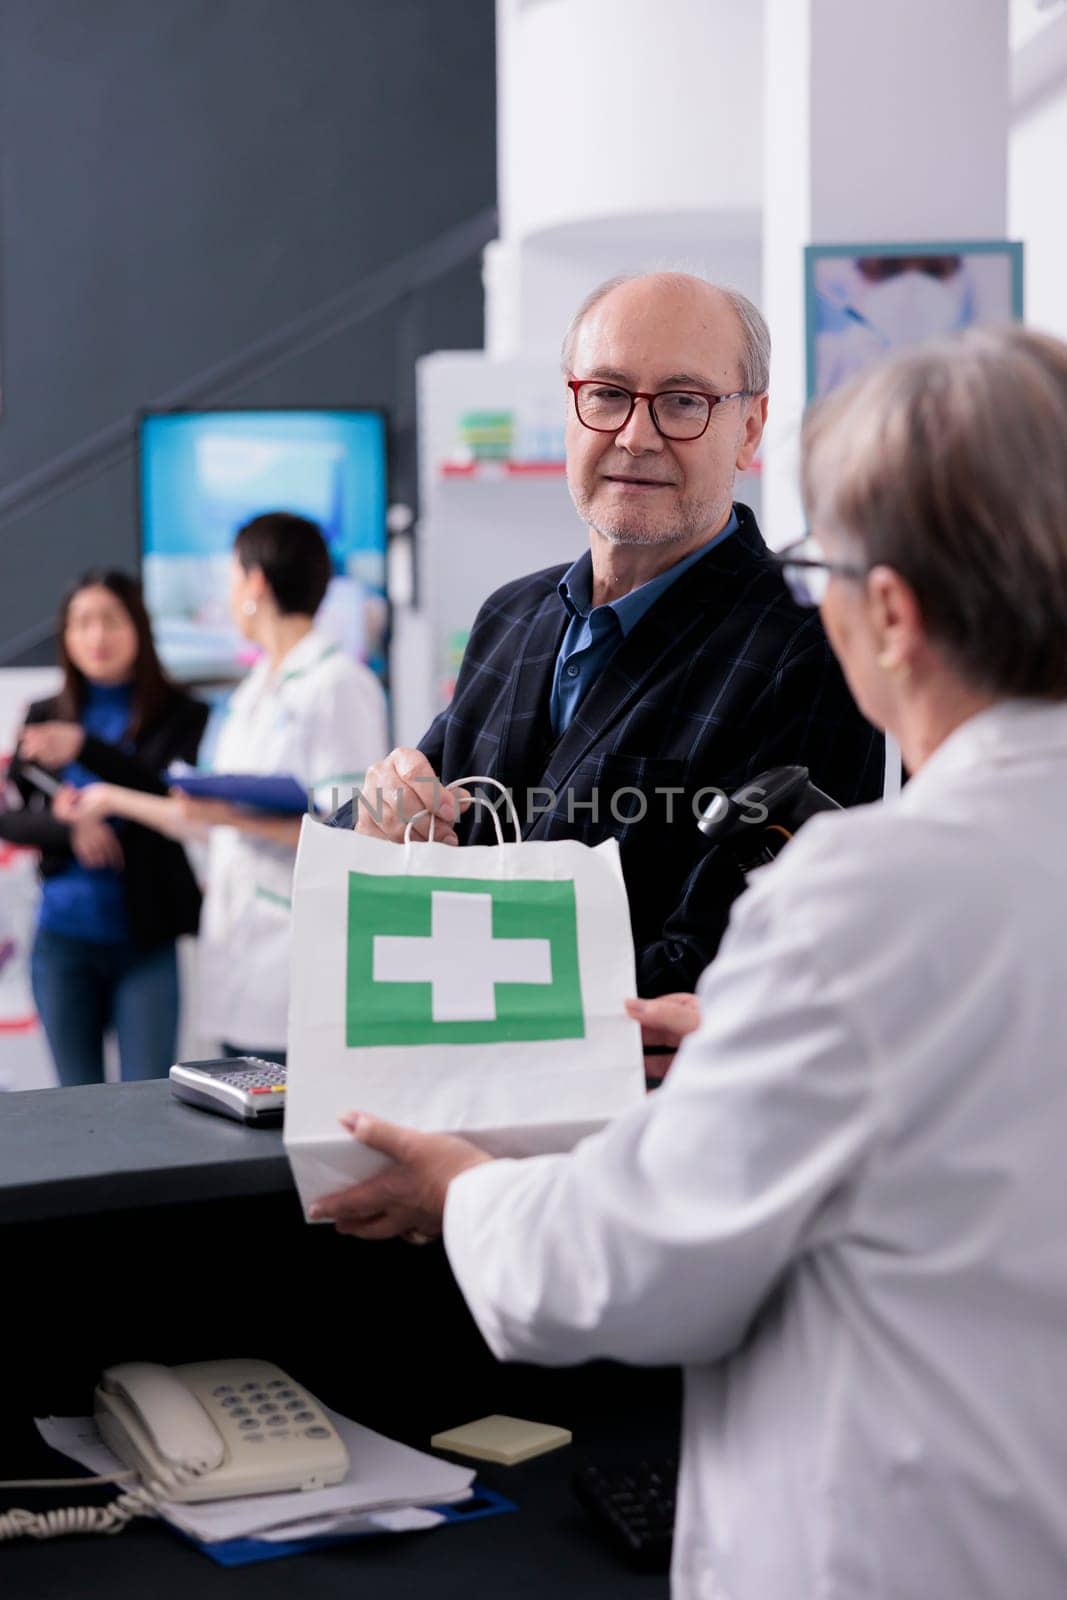 Chemist giving old man drugstore online order at checkout, holding paper bag with customer purchase. Elderly buyer in glasses visiting apothecary and taking medications package at paydesk